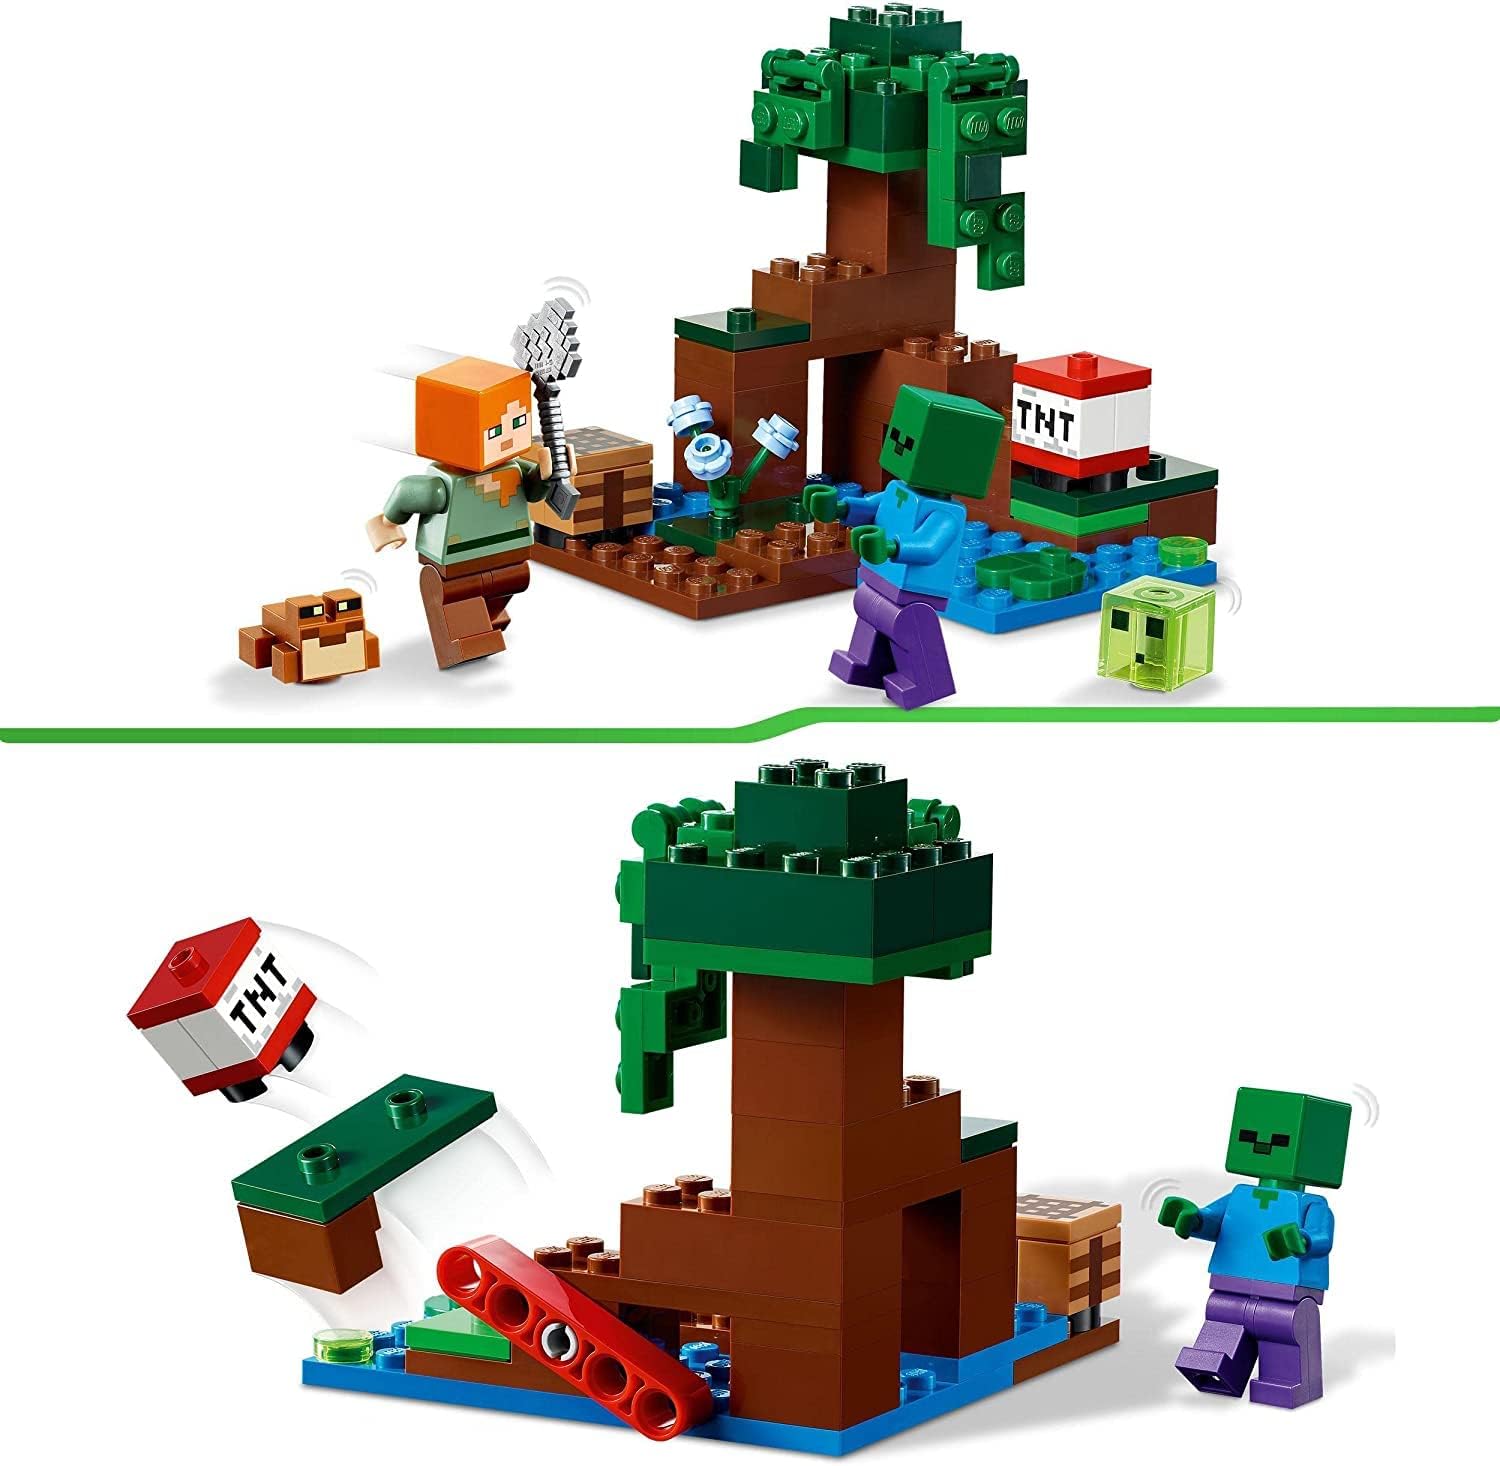 LEGO Minecraft The Swamp Adventure Building Kit for Ages 7+